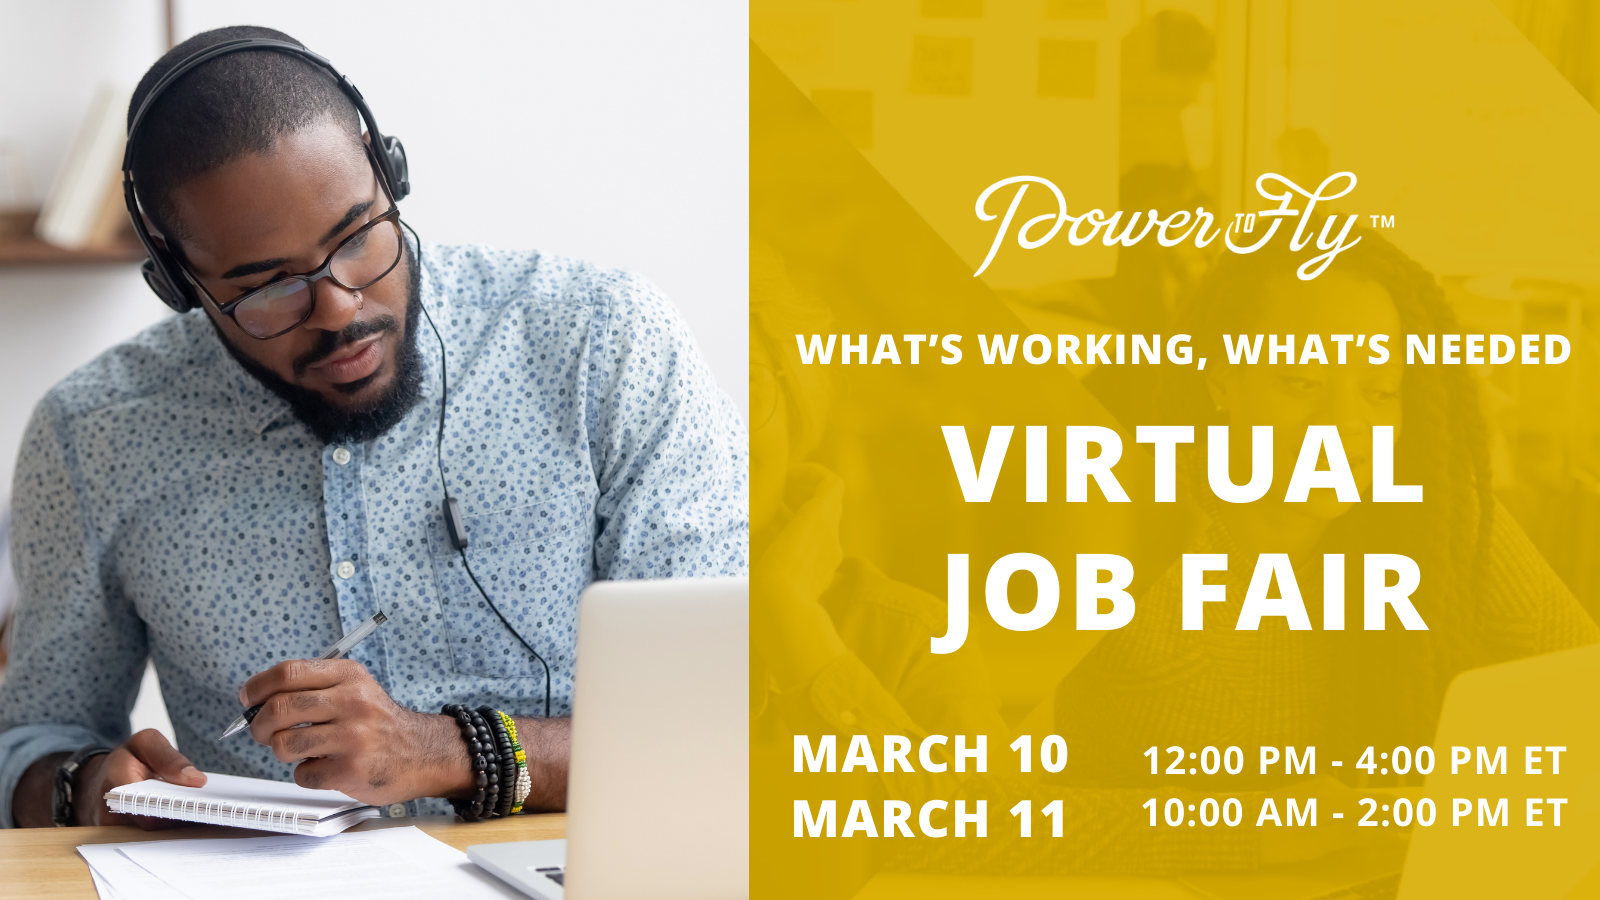 Virtual Job Fair: What’s Working, What’s Needed